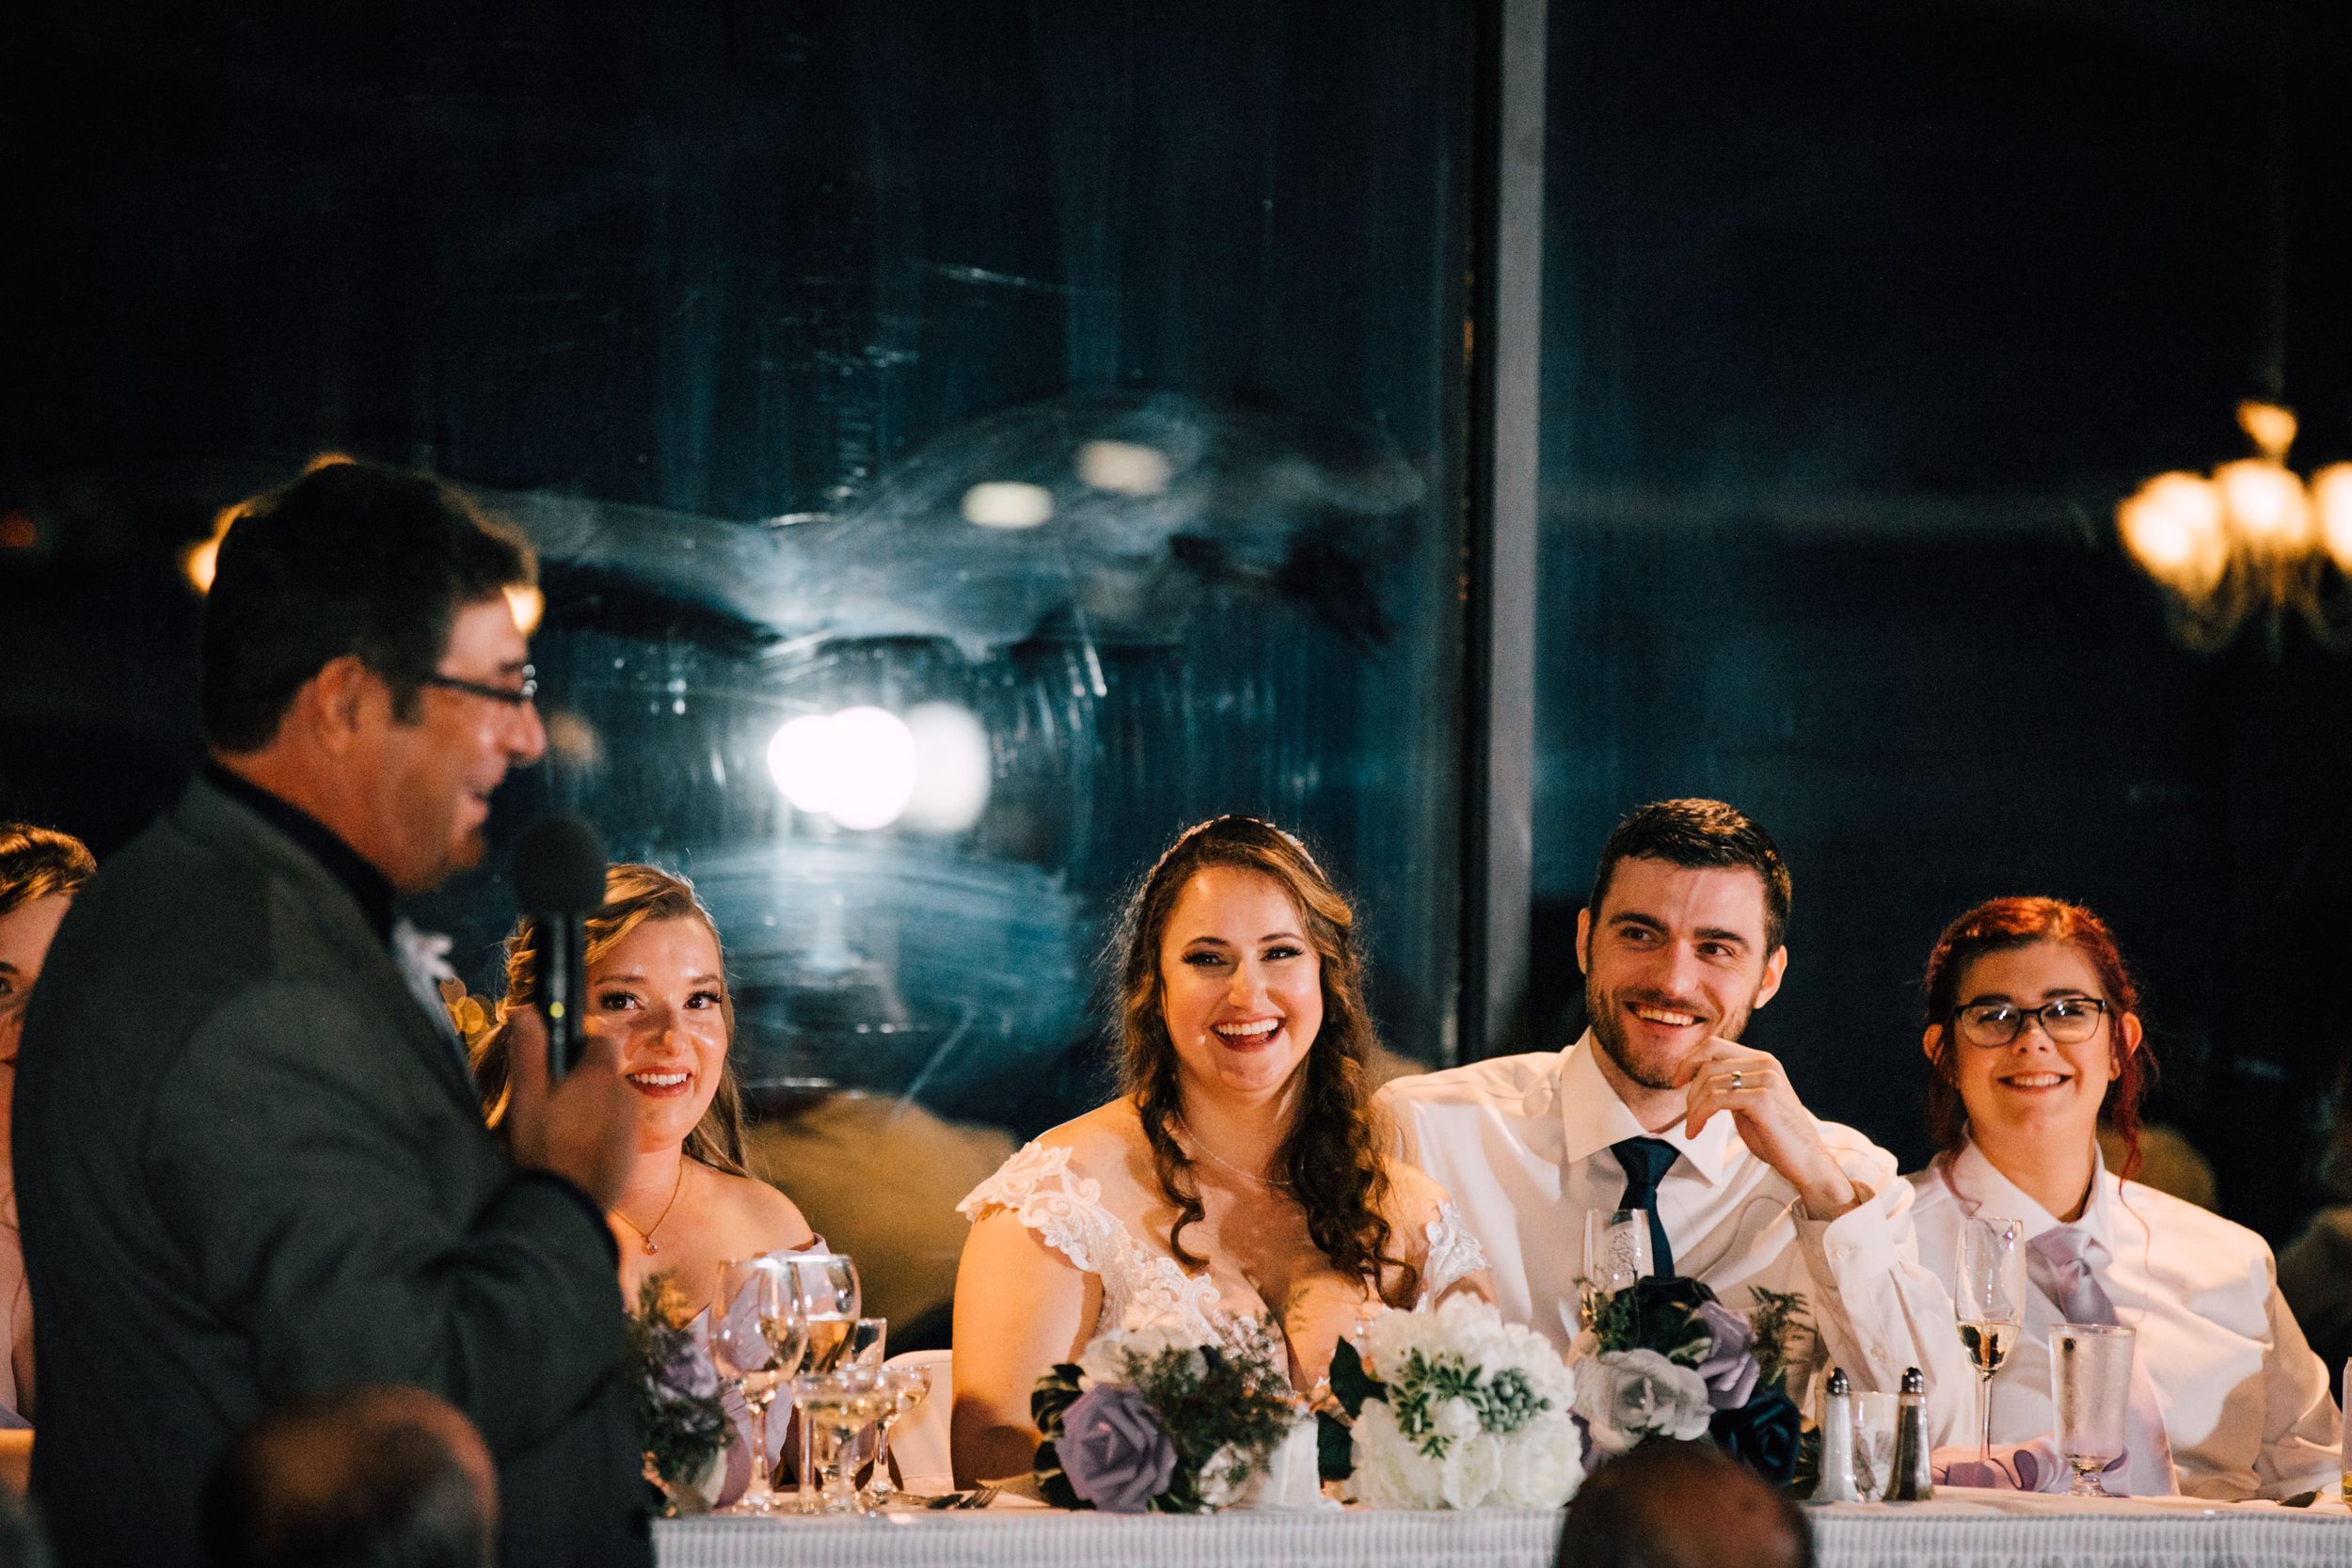  the bride and groom smile as a guest gives a toast during their wedding at endwell greens 